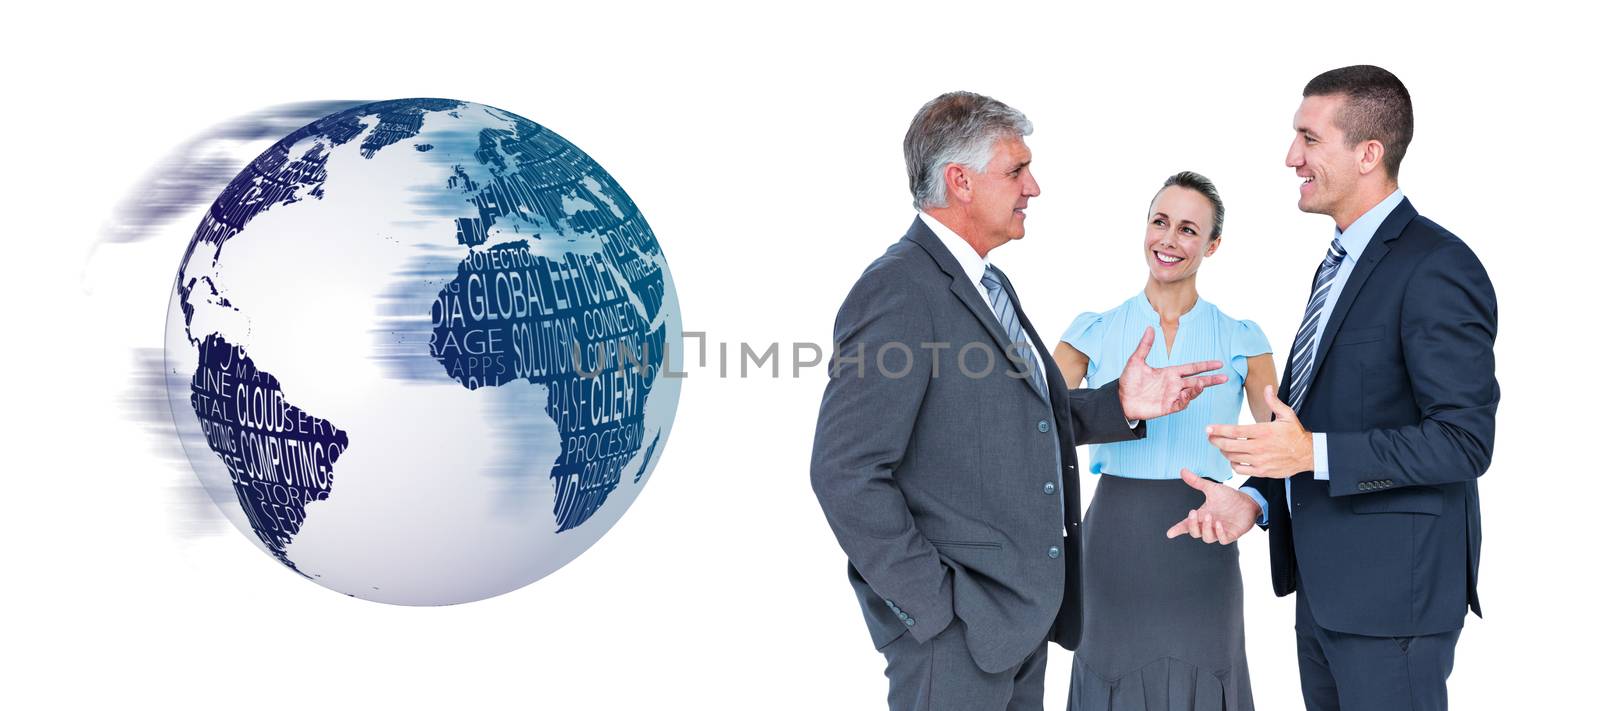 Composite image of business people standing and talking by Wavebreakmedia